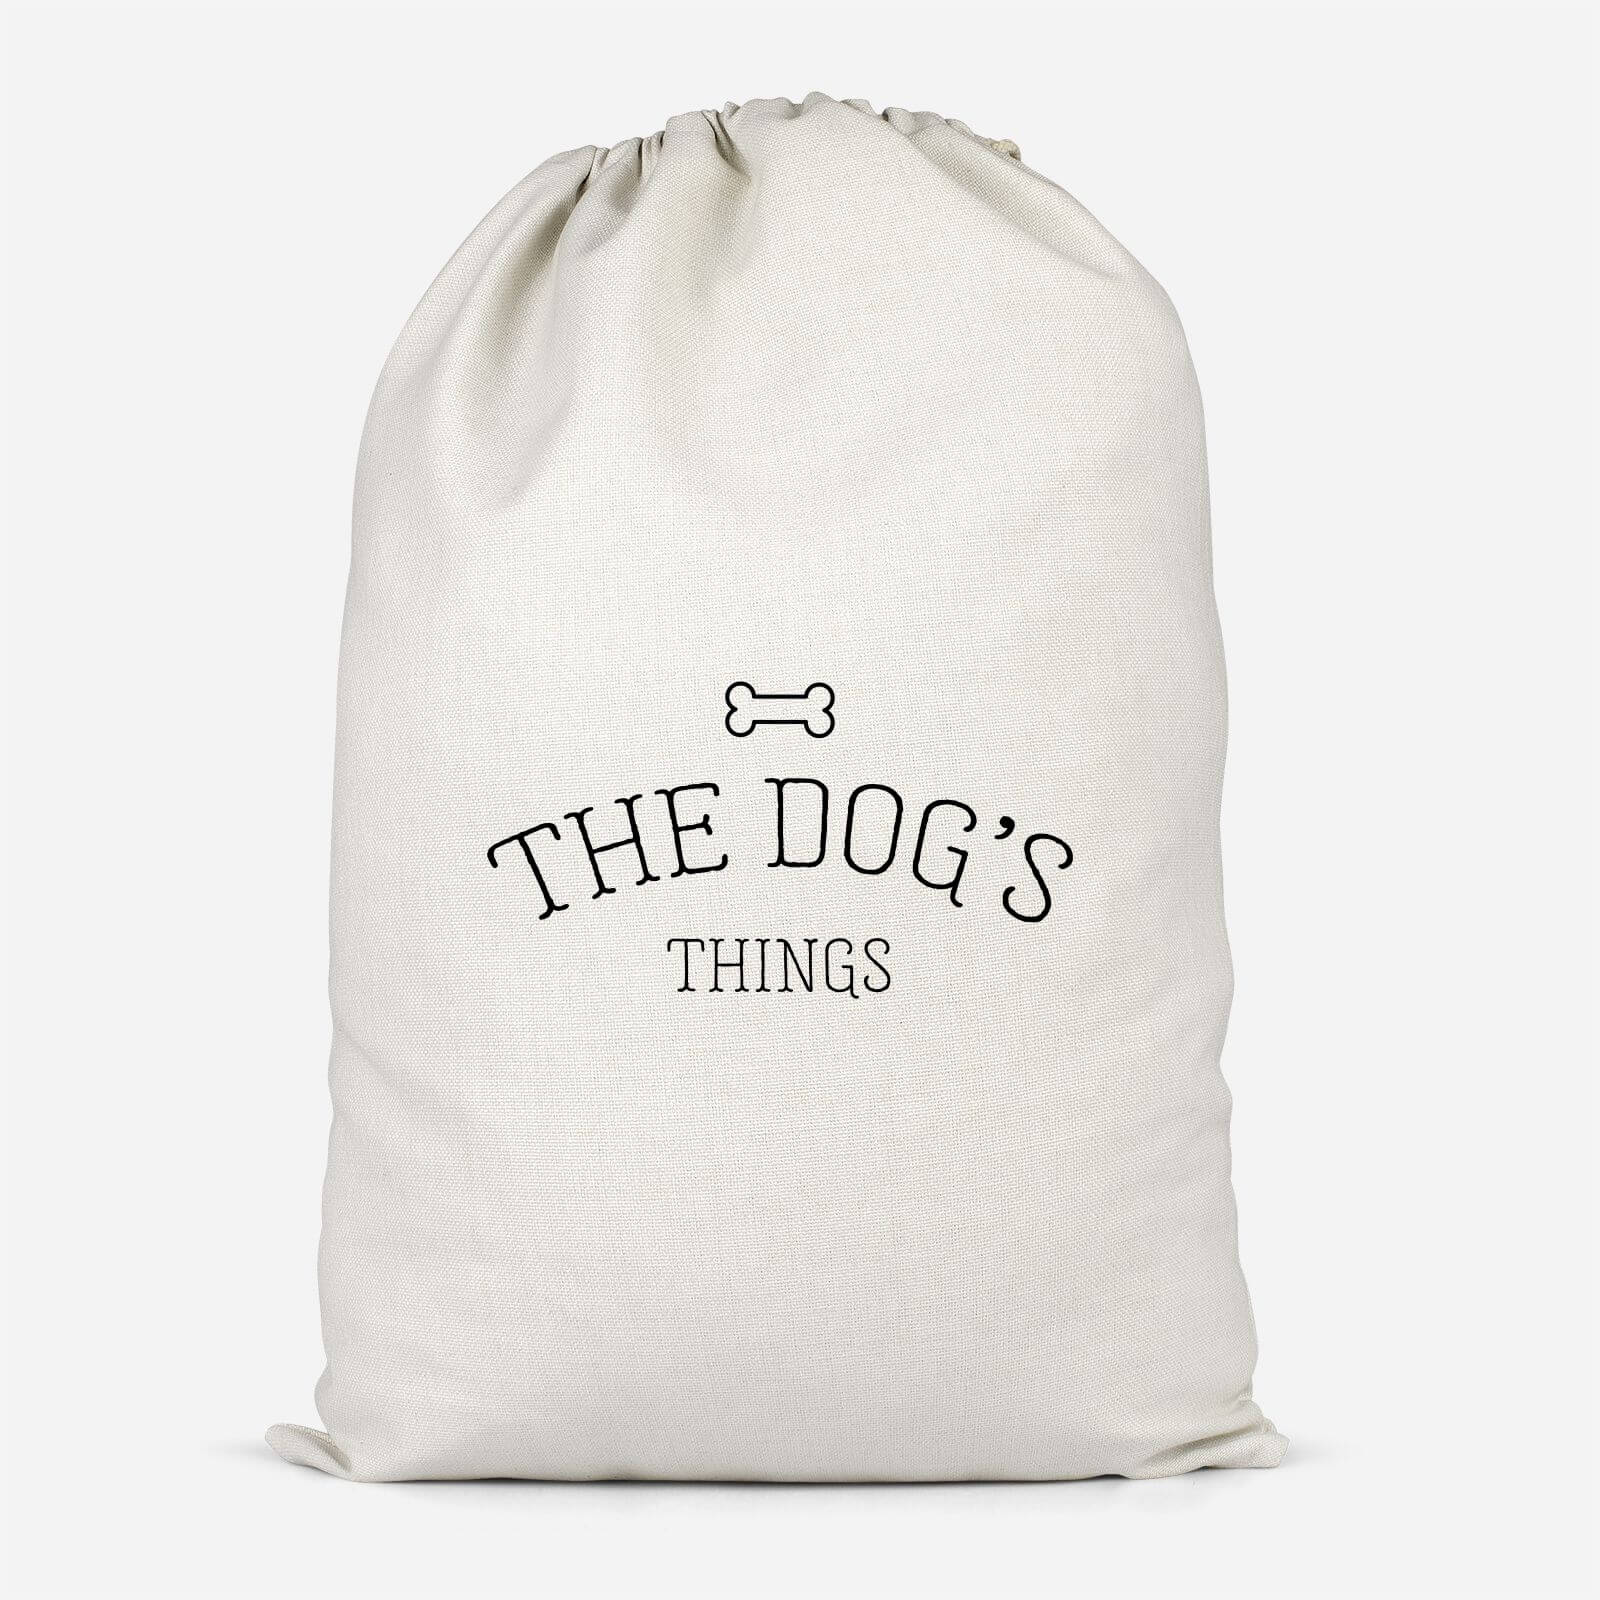 The Dogs Things Cotton Storage Bag   Large